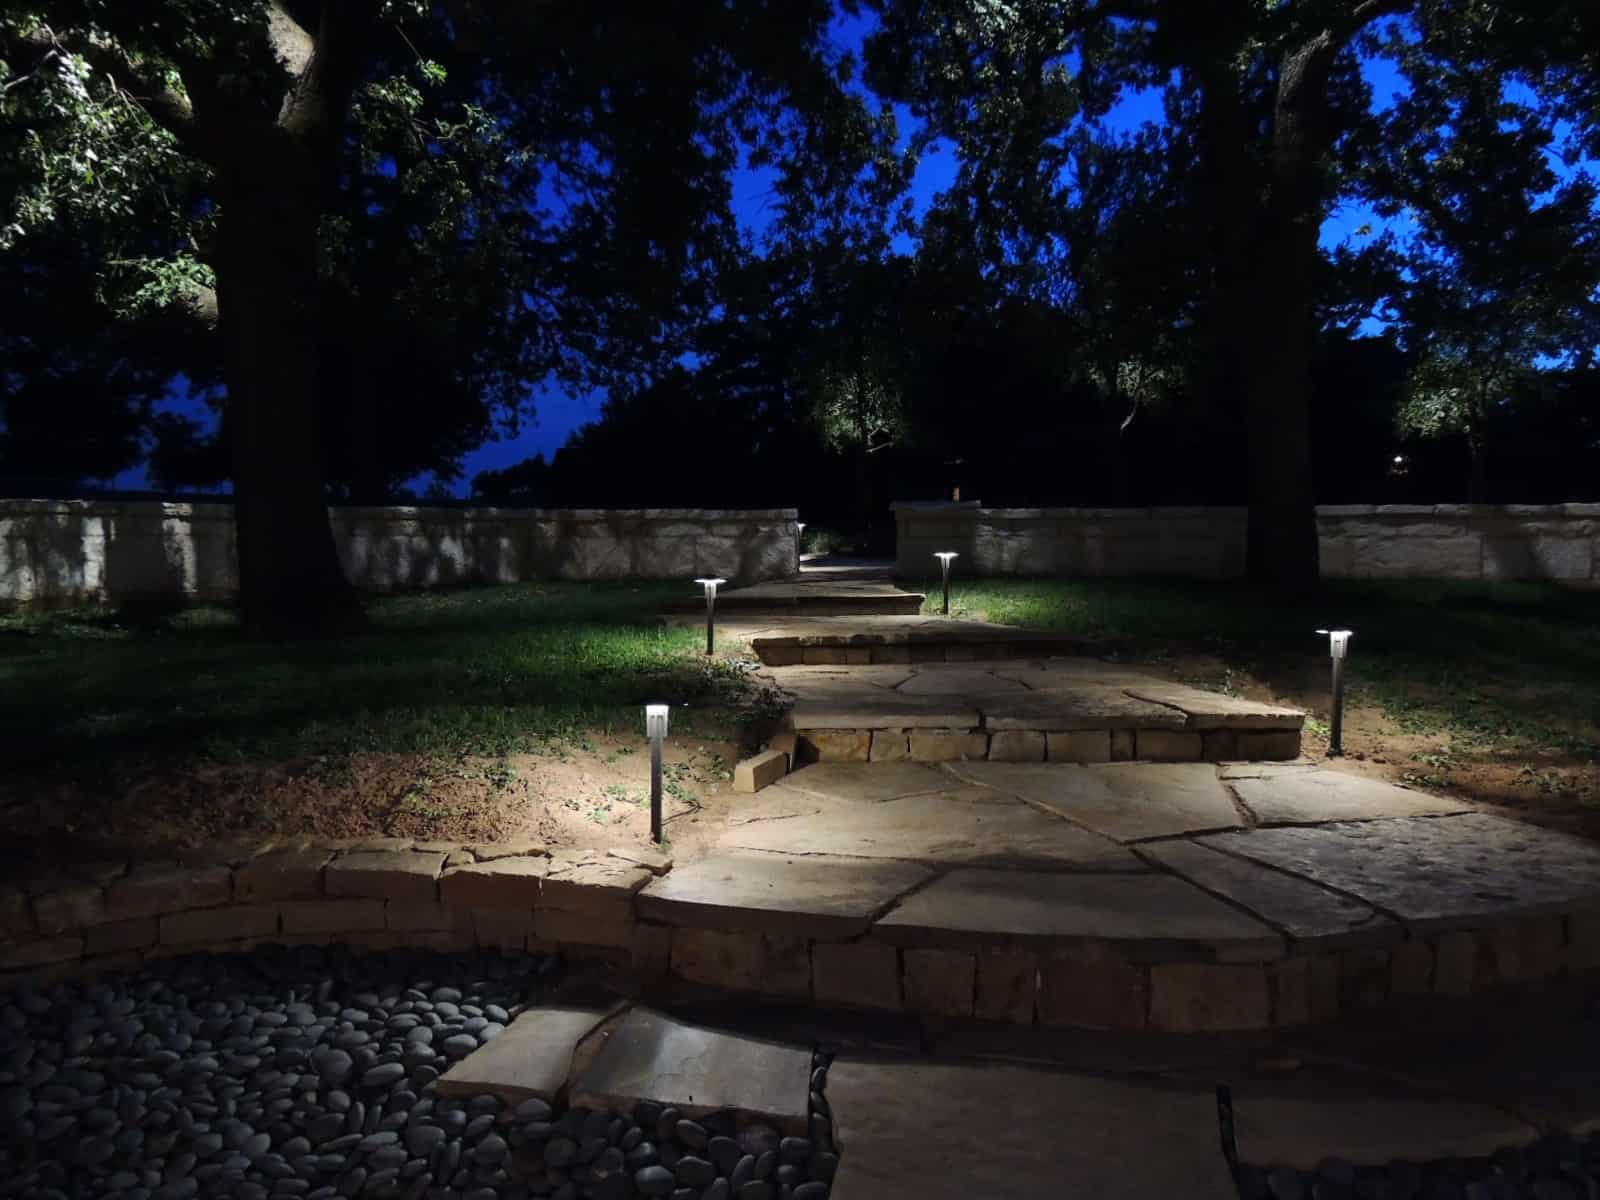 LED Light fixtures line a stone pathway